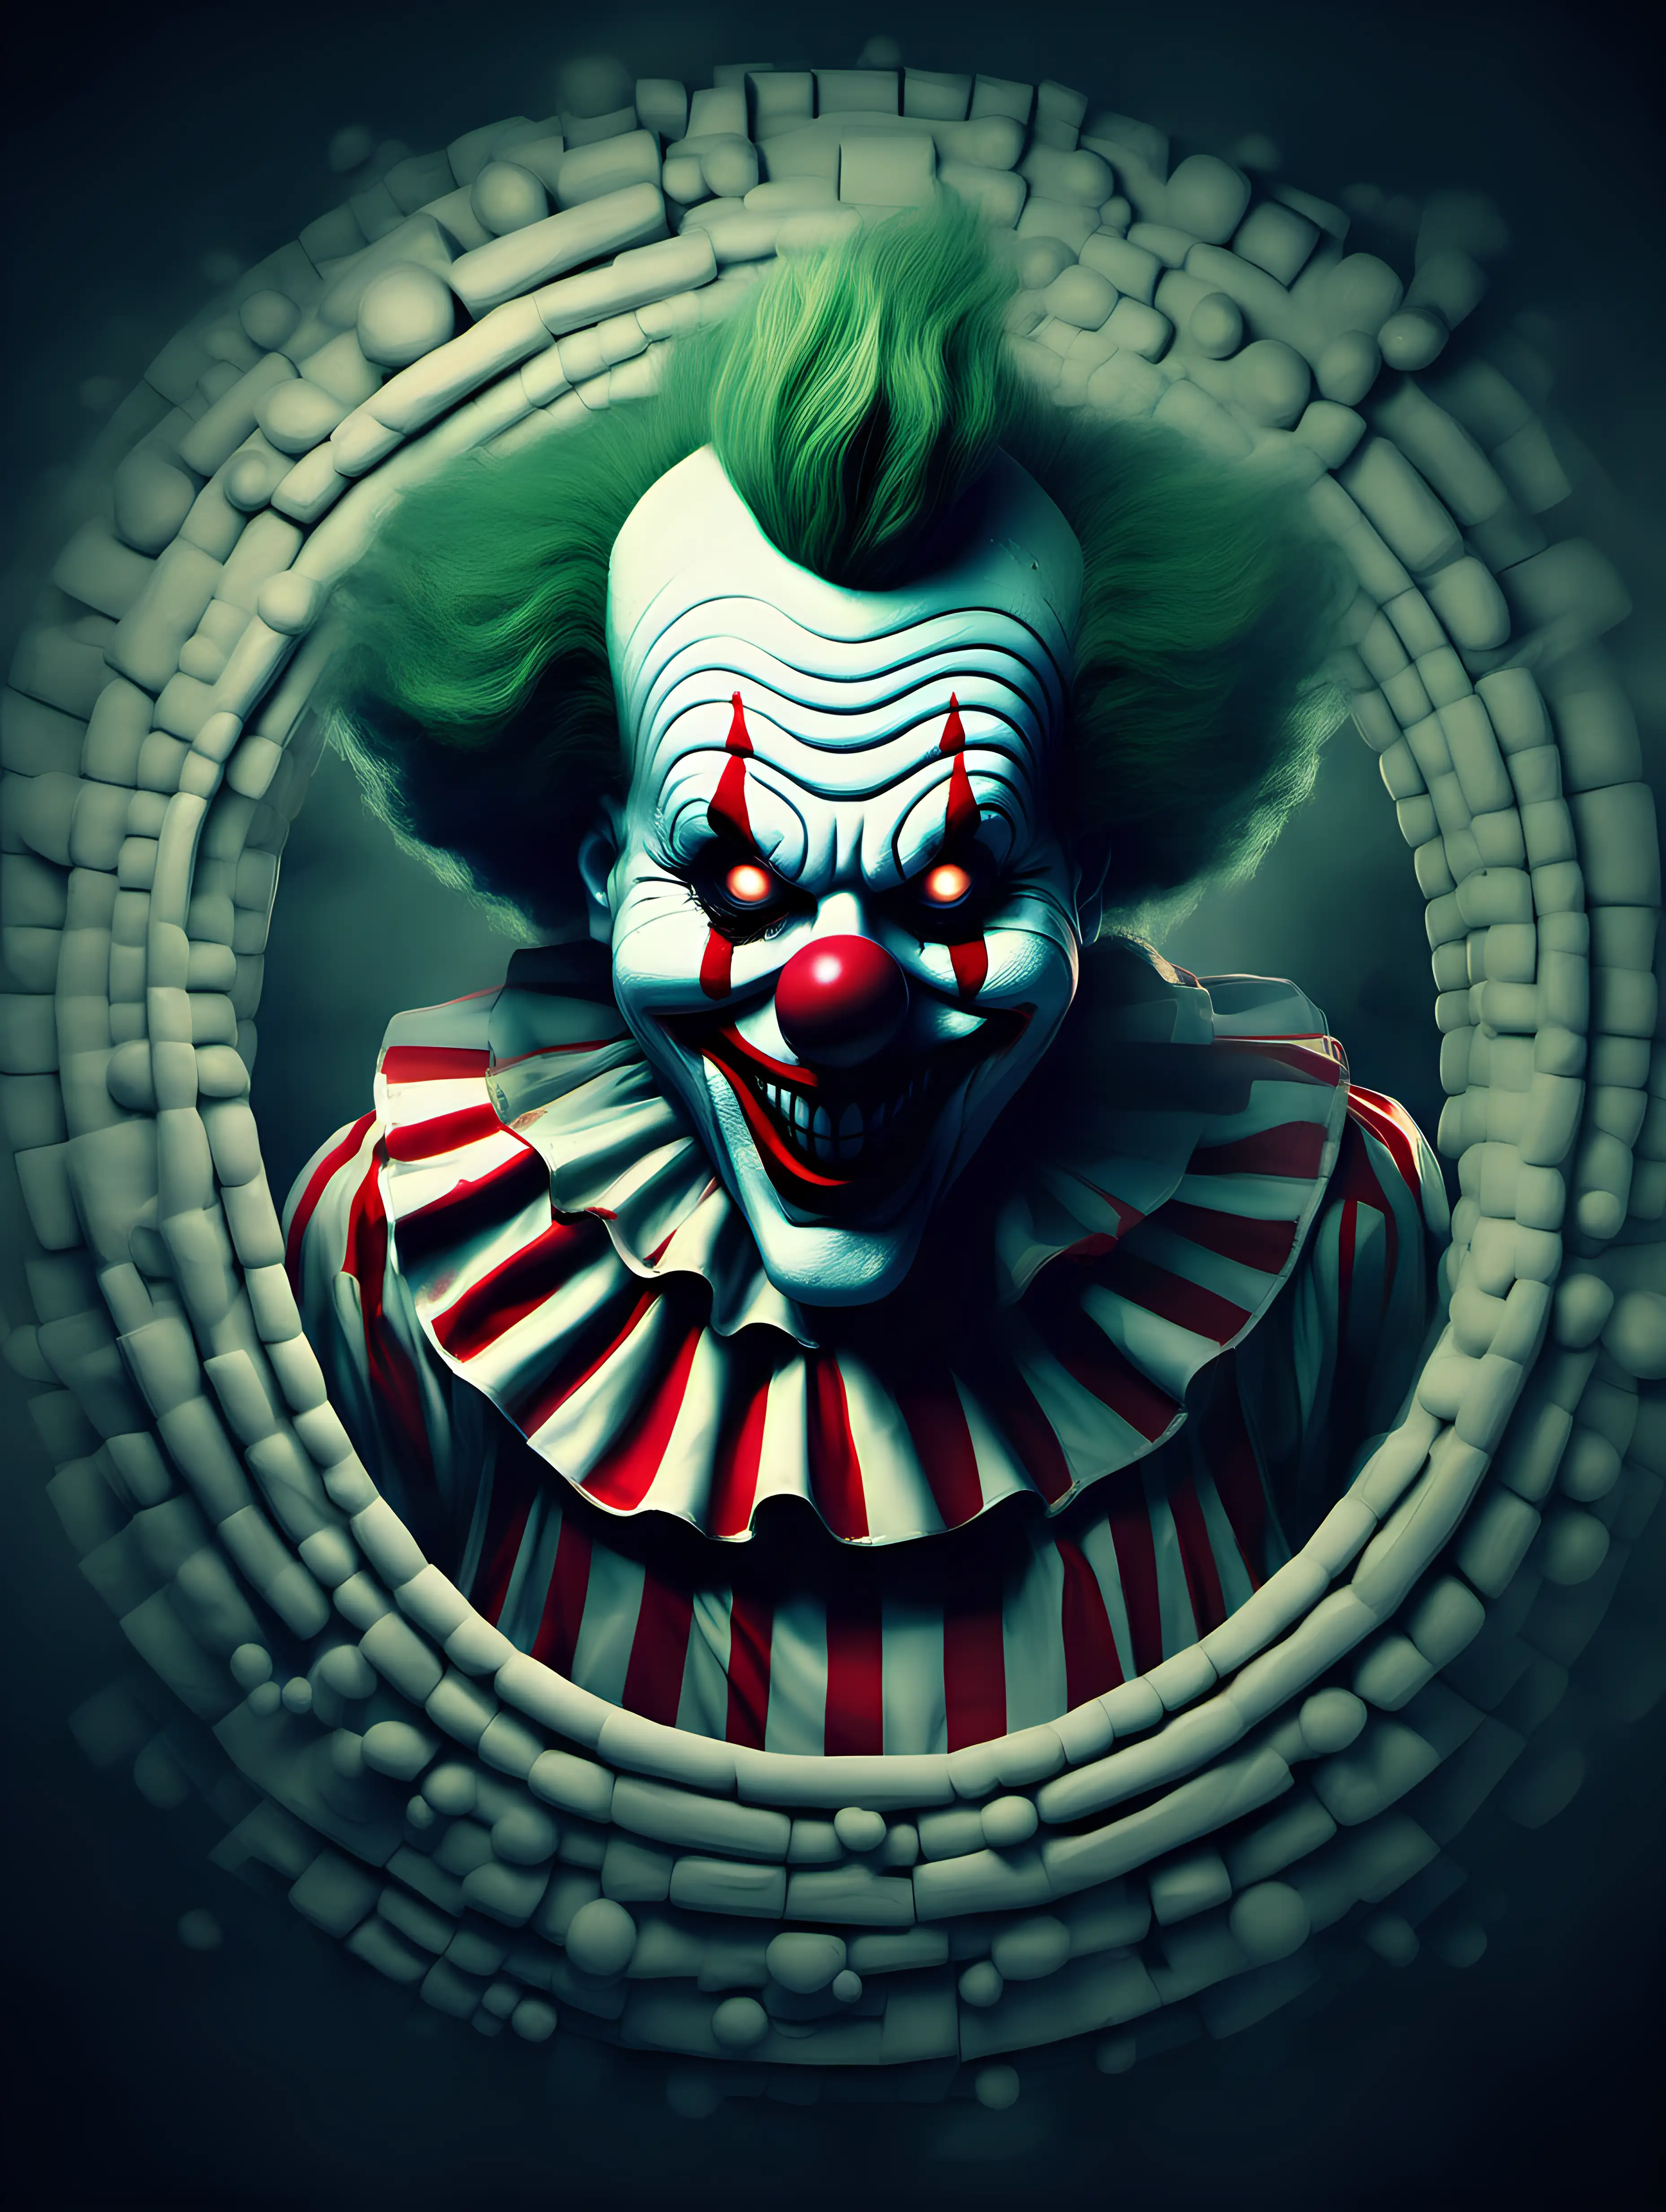 create a illustration page of a 3d hypnotic illusion creppy scary horror clown
